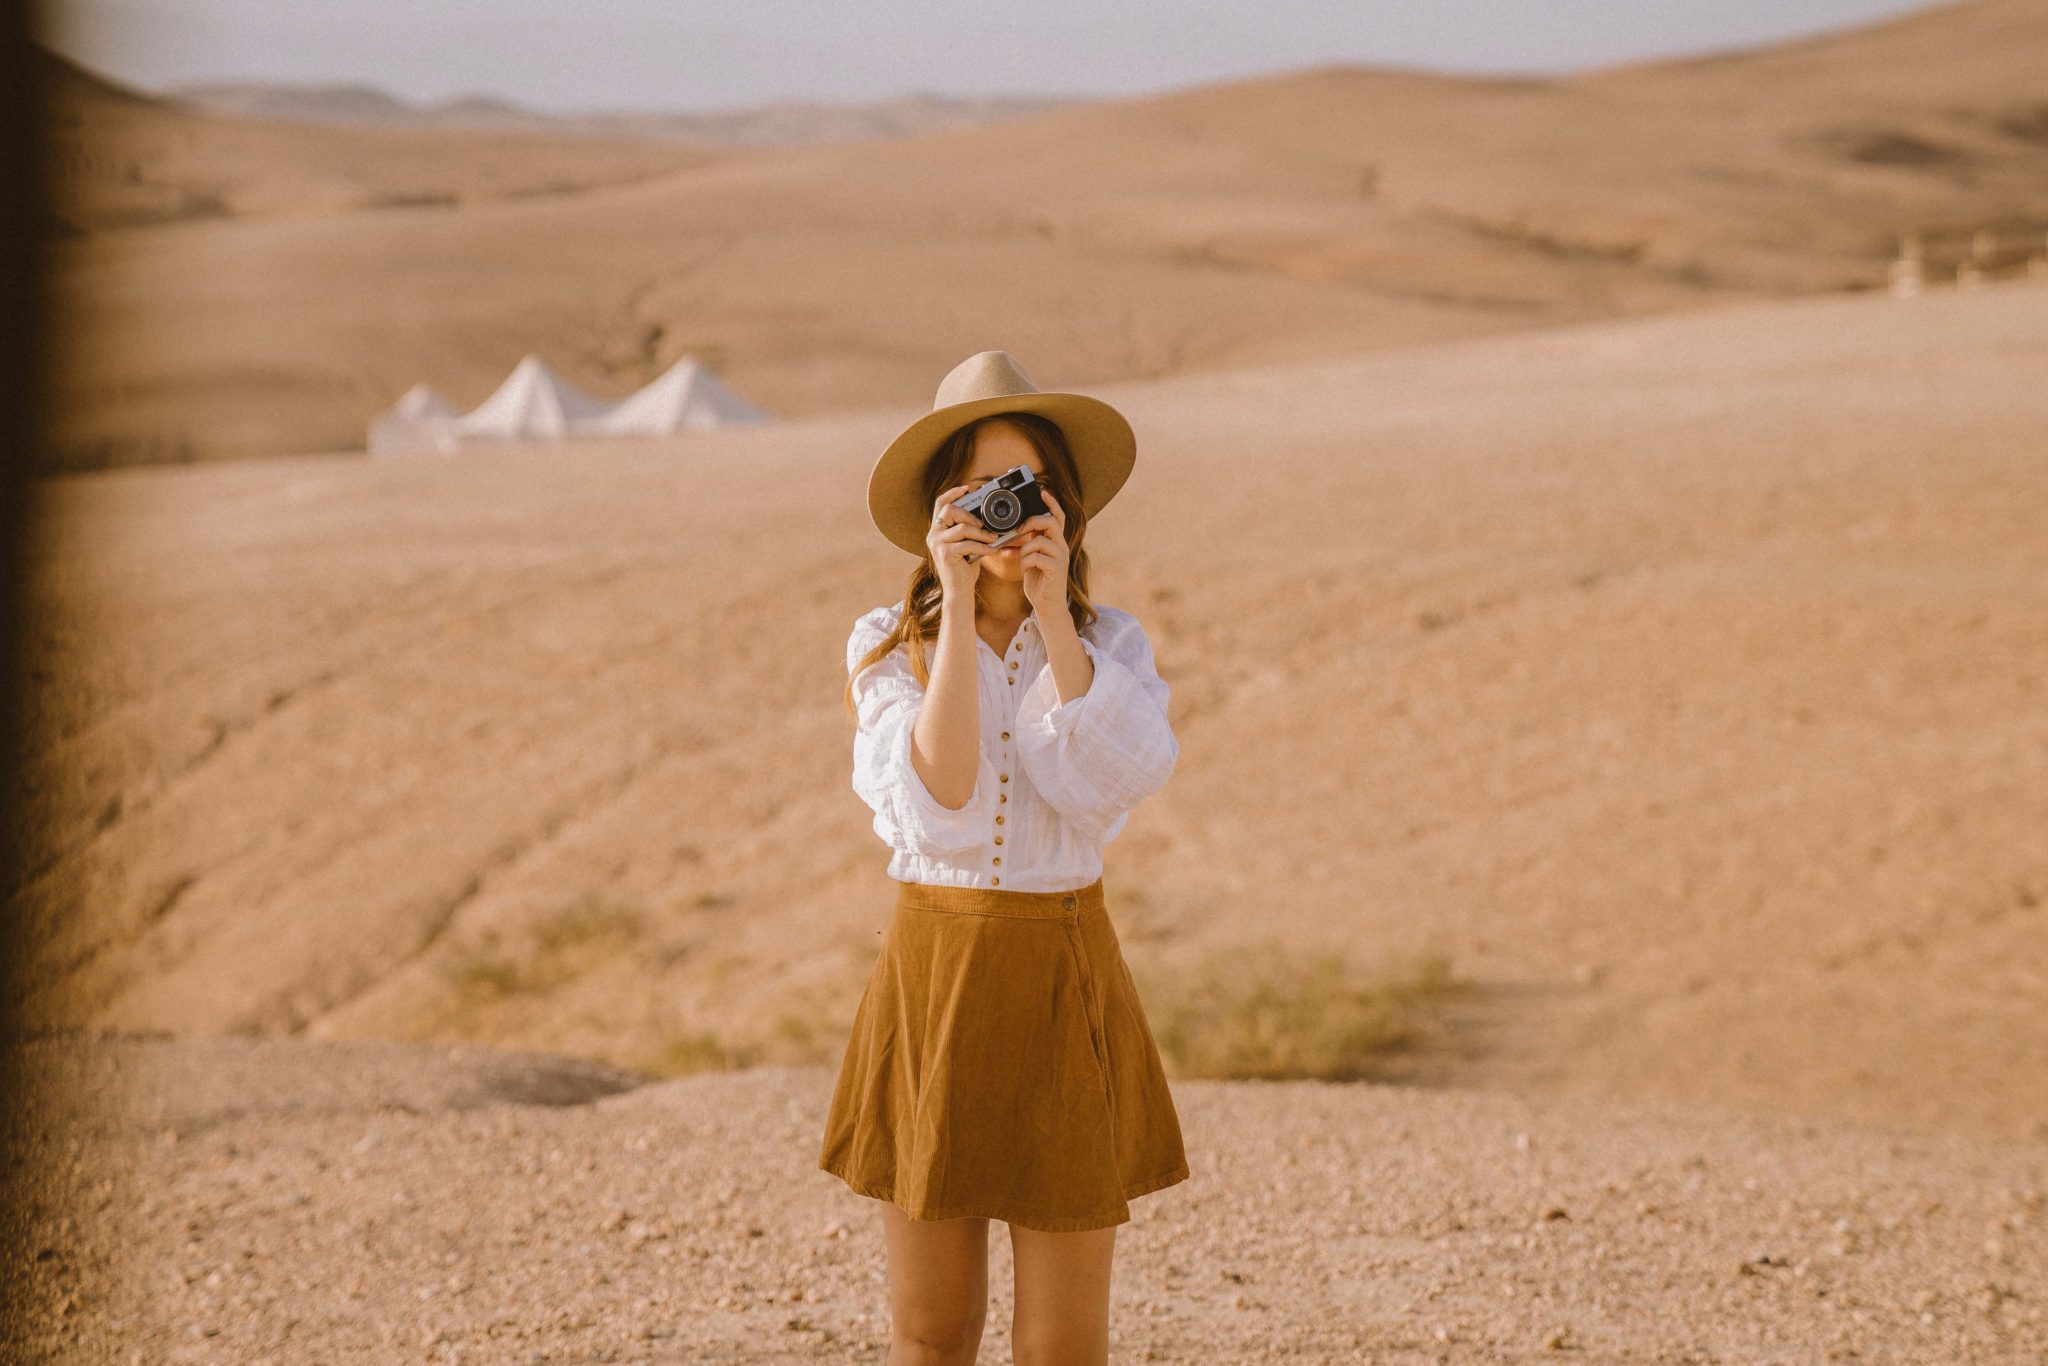 An Interview with Hello Emilie on how to make it as a Travel Photographer